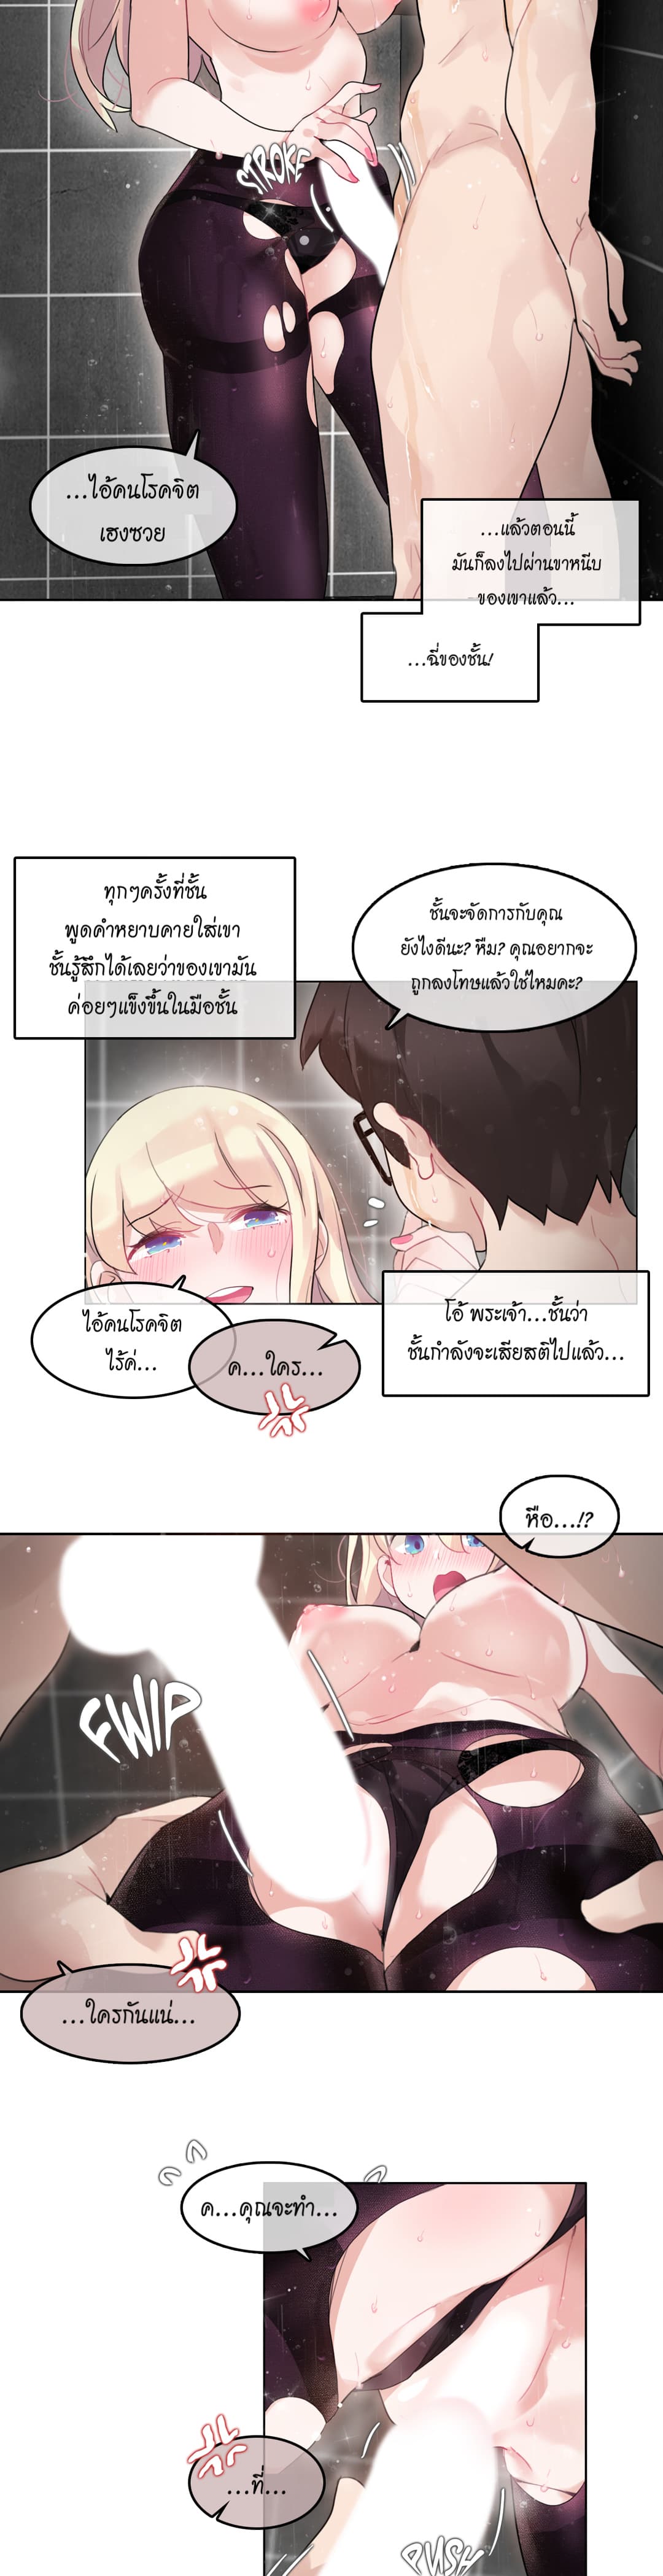 A Pervert’s Daily Life 44 (8)